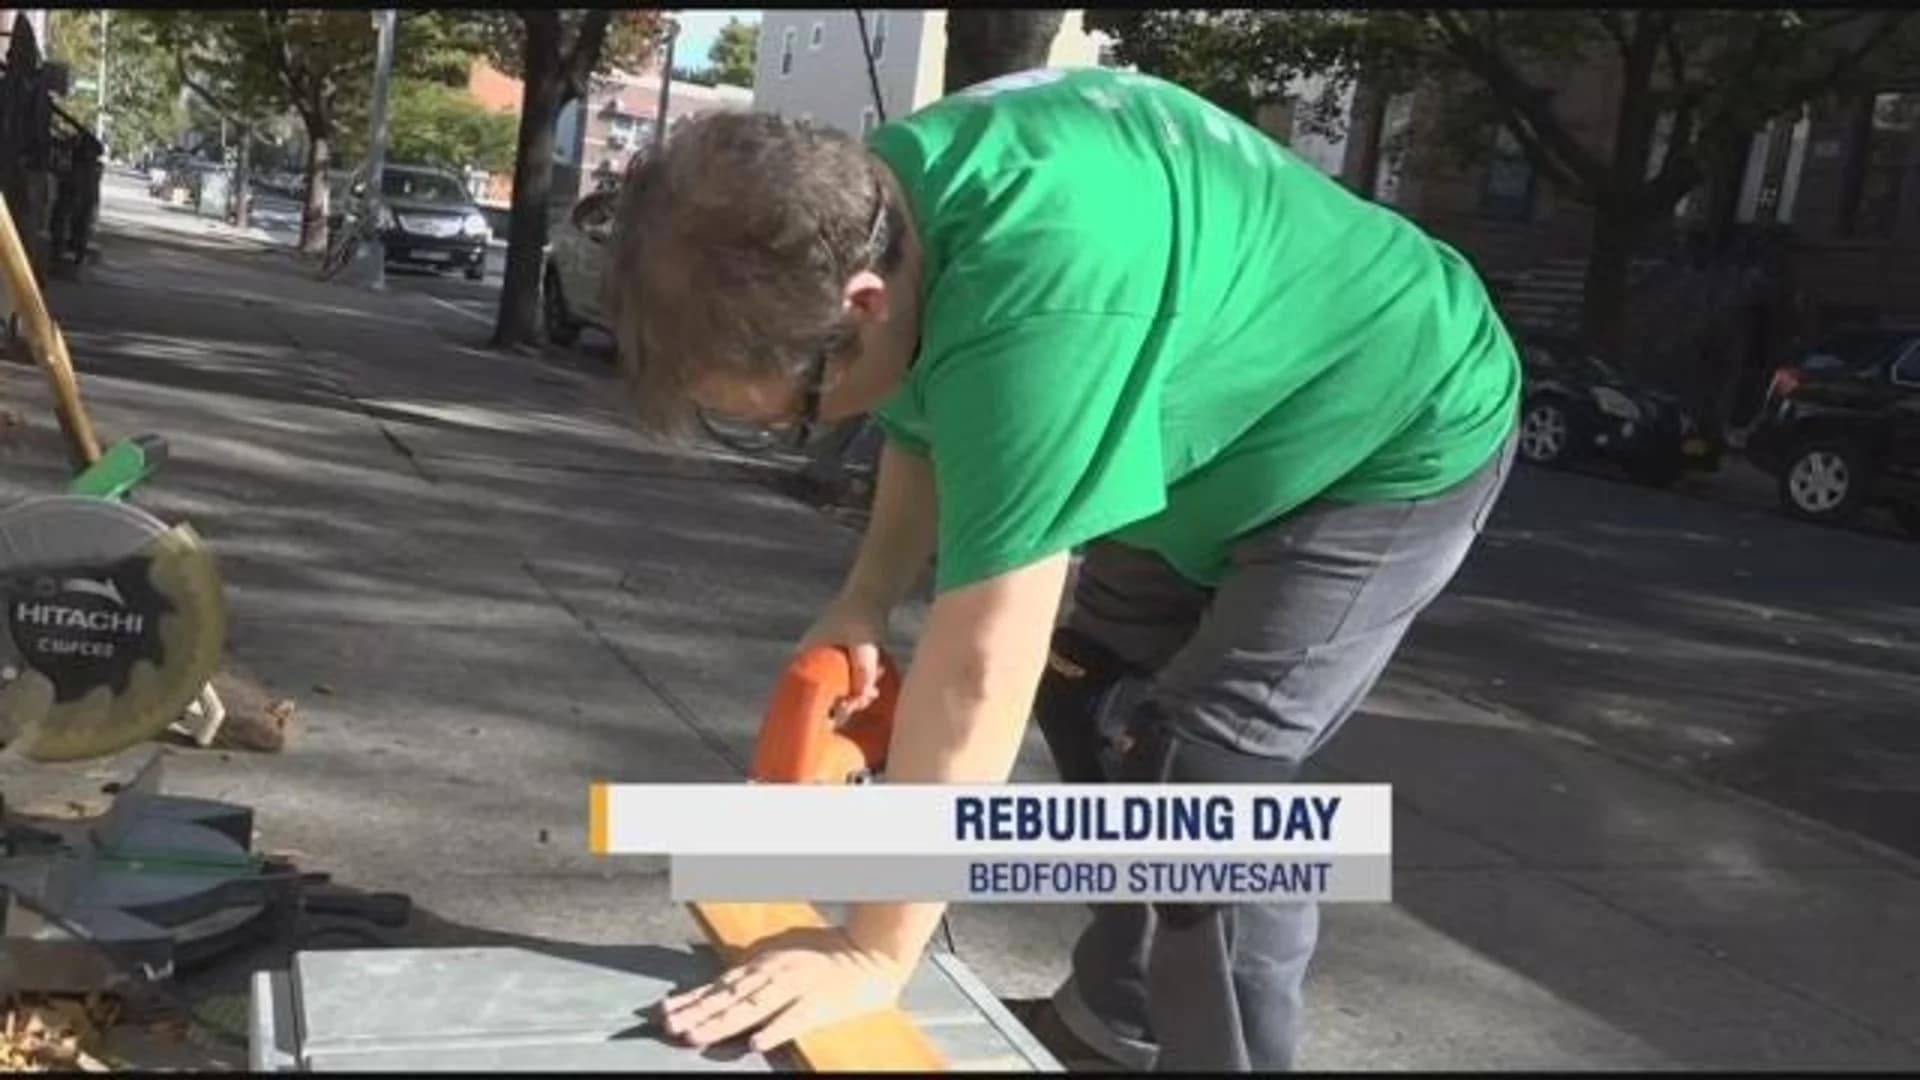 Group pitches in to help rebuild homes for people in need